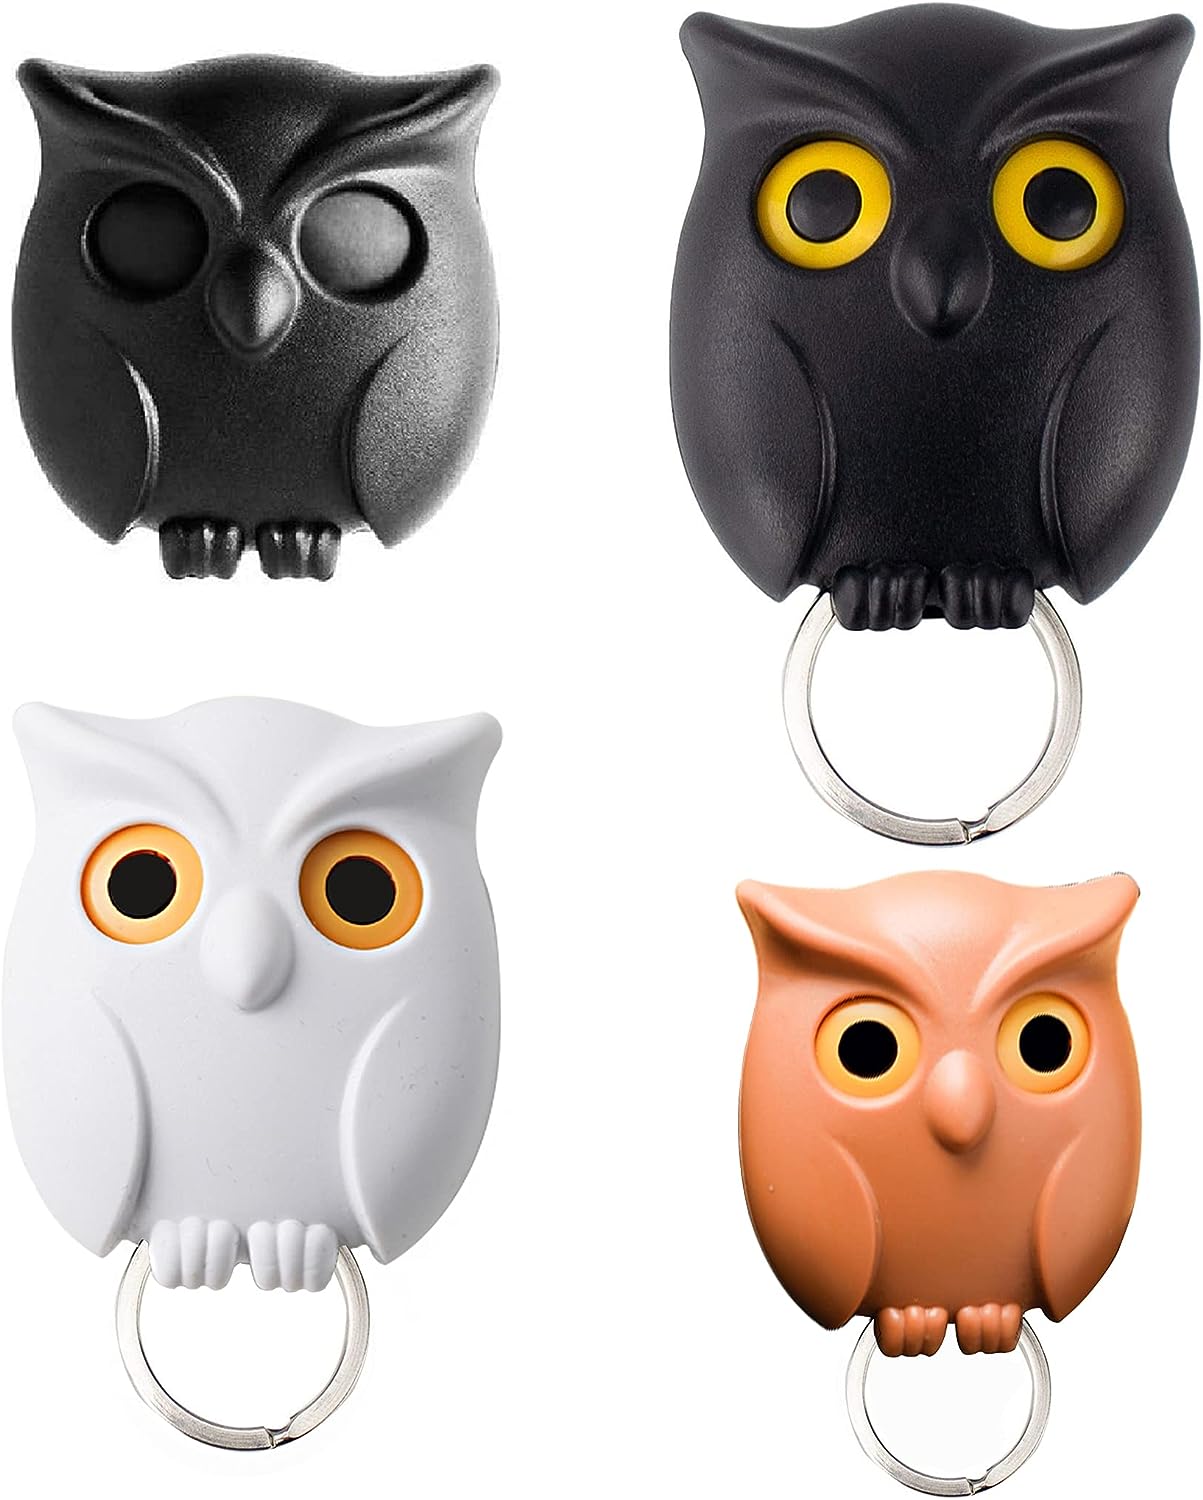 Owl Automatic Key Holder - Cool and Cute Key Holder - Magnetic Key Holder - Owl with Open and Close Eyes